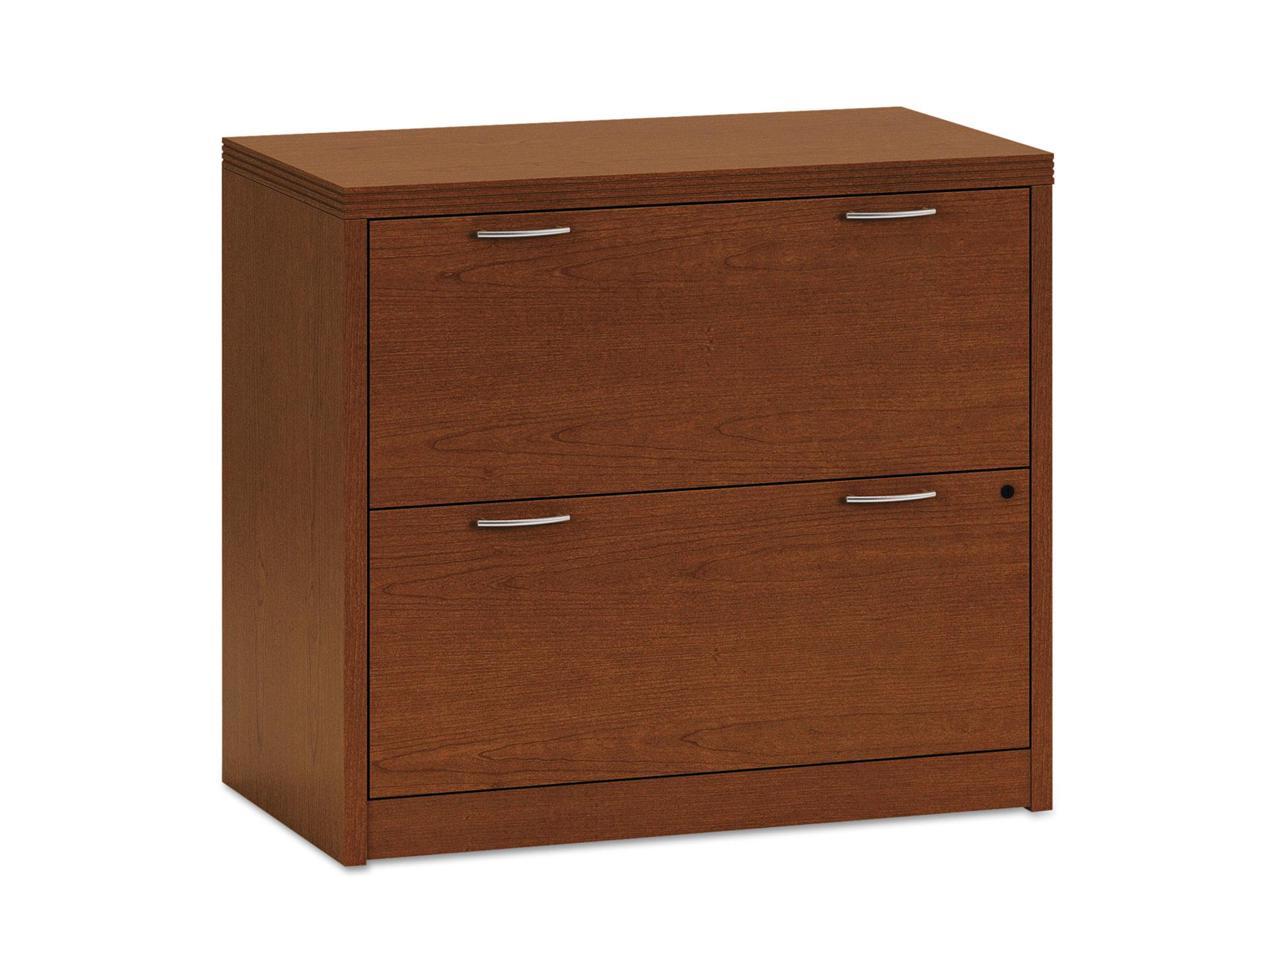 HON Valido 2-Drawer Lateral File, 36"W - image 4 of 11